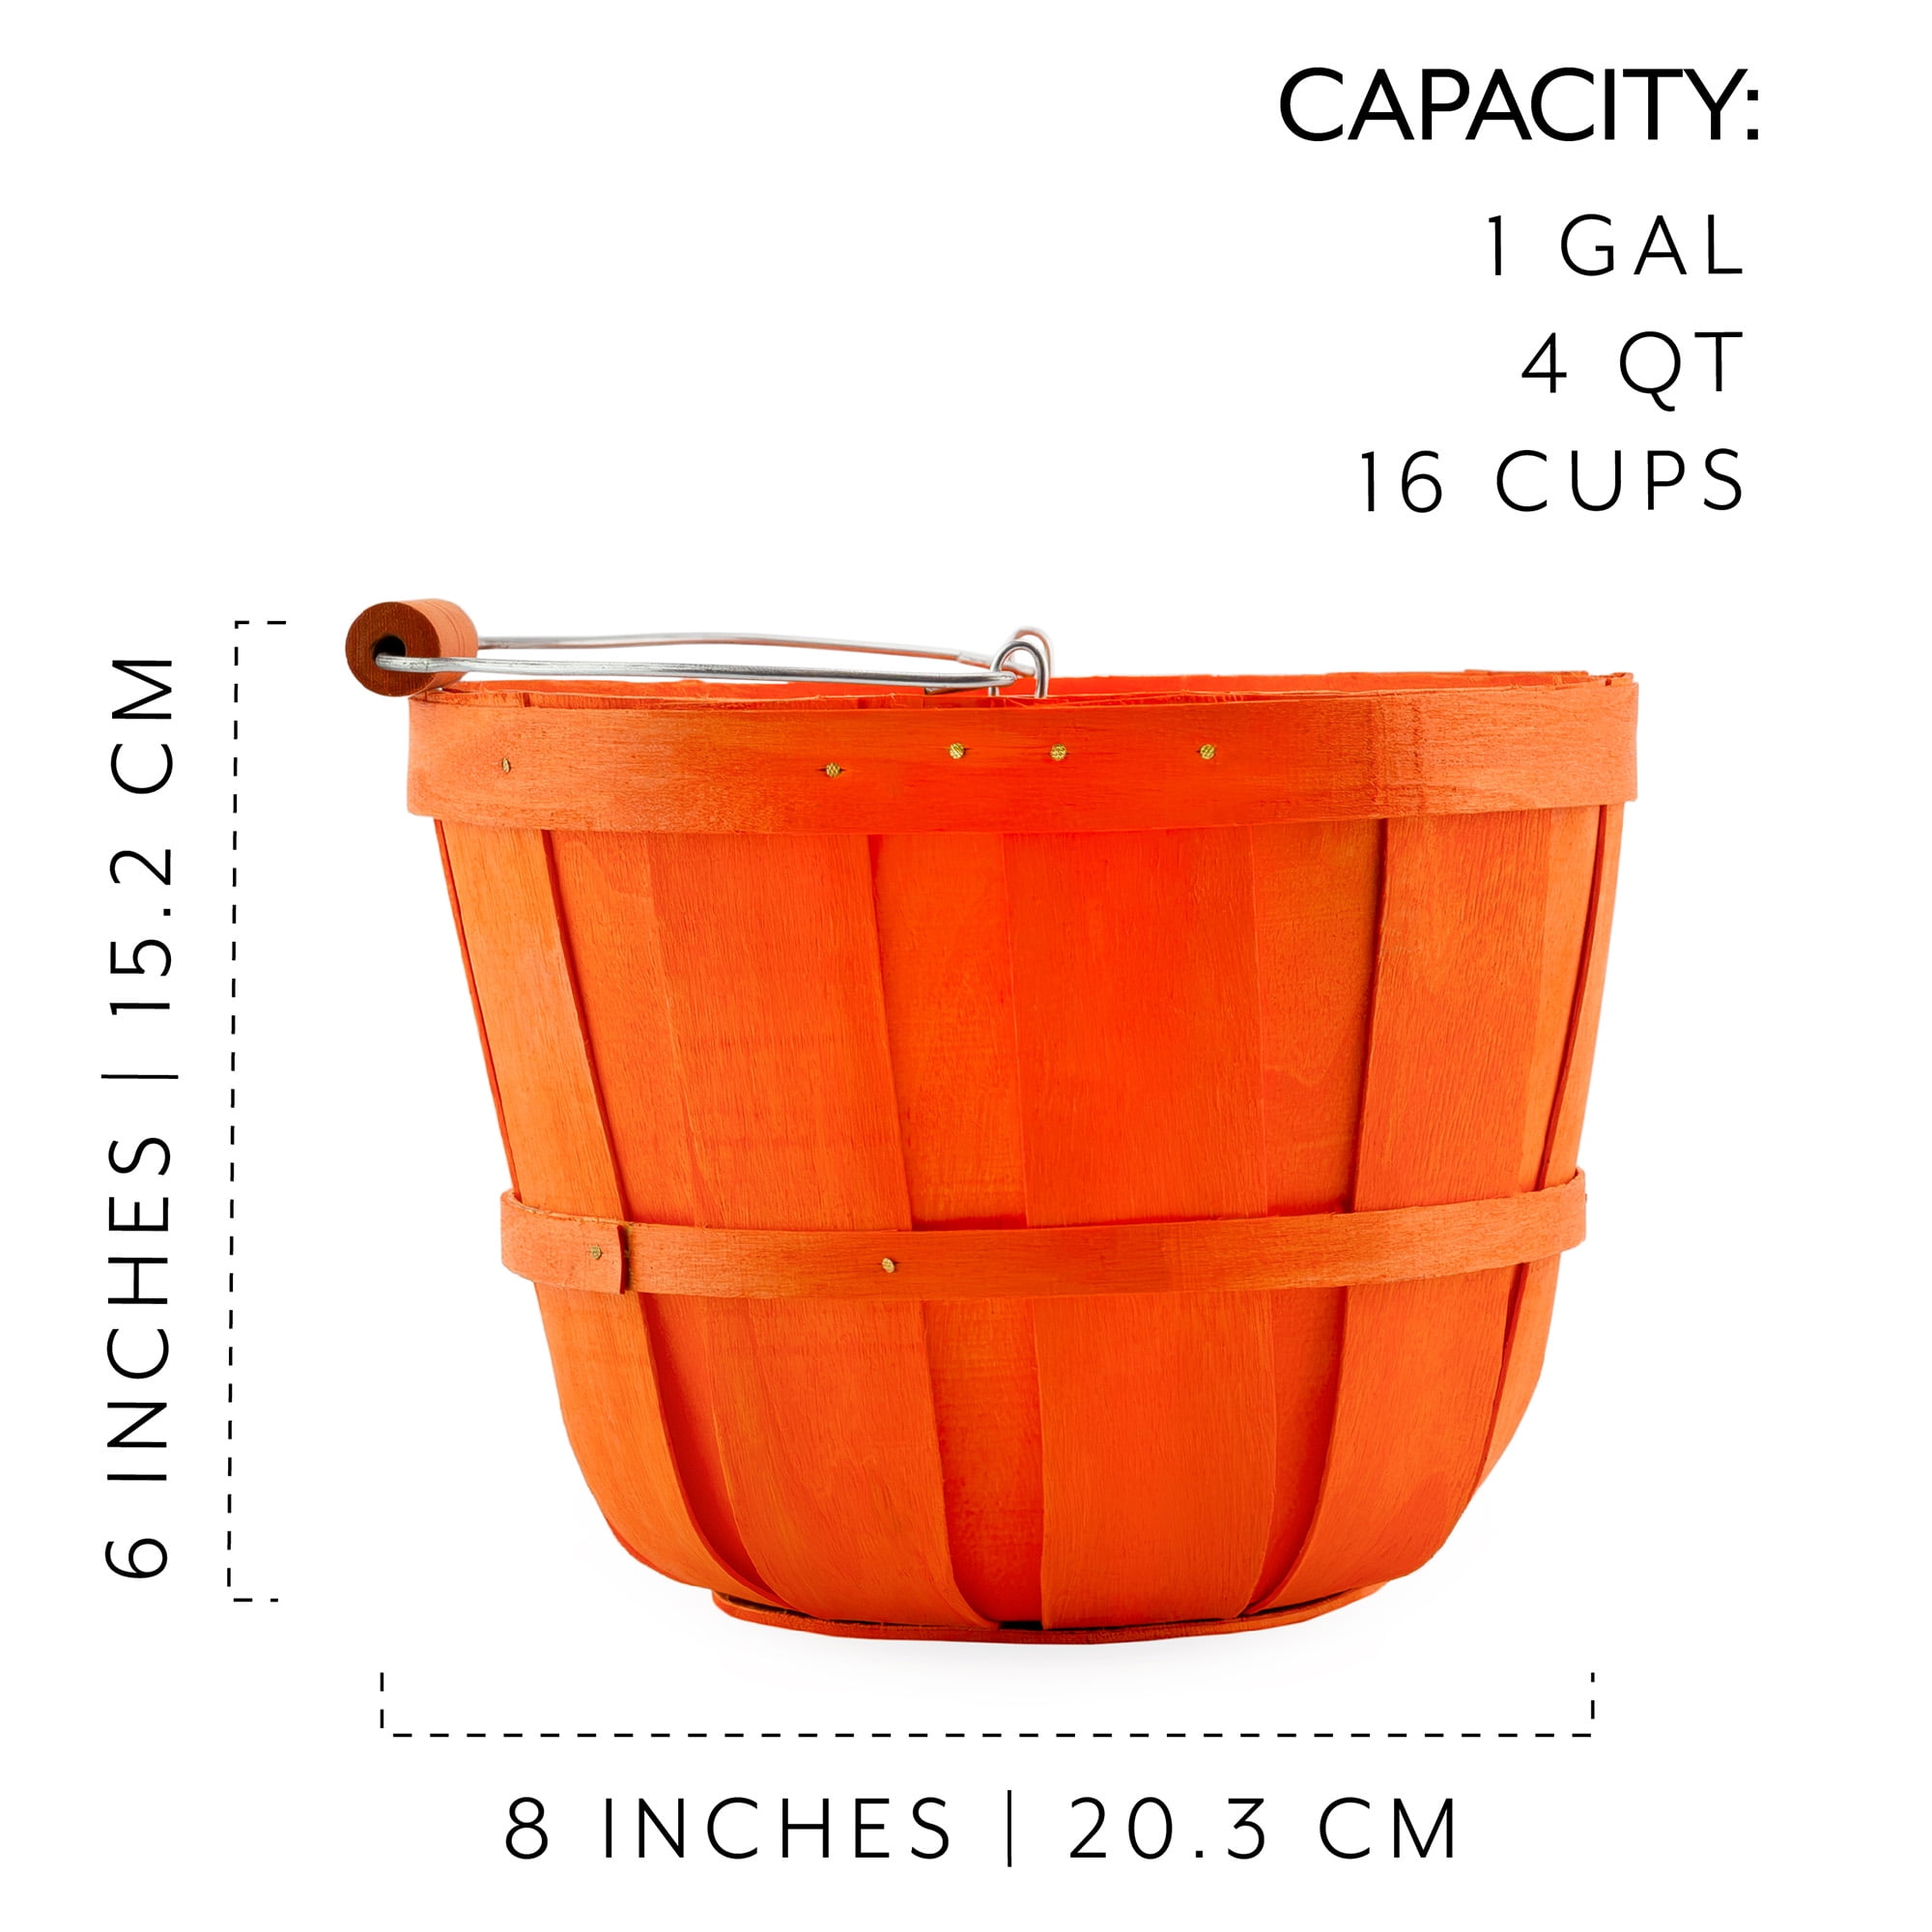 Marsui 16 Pcs 7.5 x 5.9 Inch Round Wooden Basket Wood Fruit Buckets with  Handle Vegetable Basket for Garden Picking Harvest Basket for Vegetable  Fruit